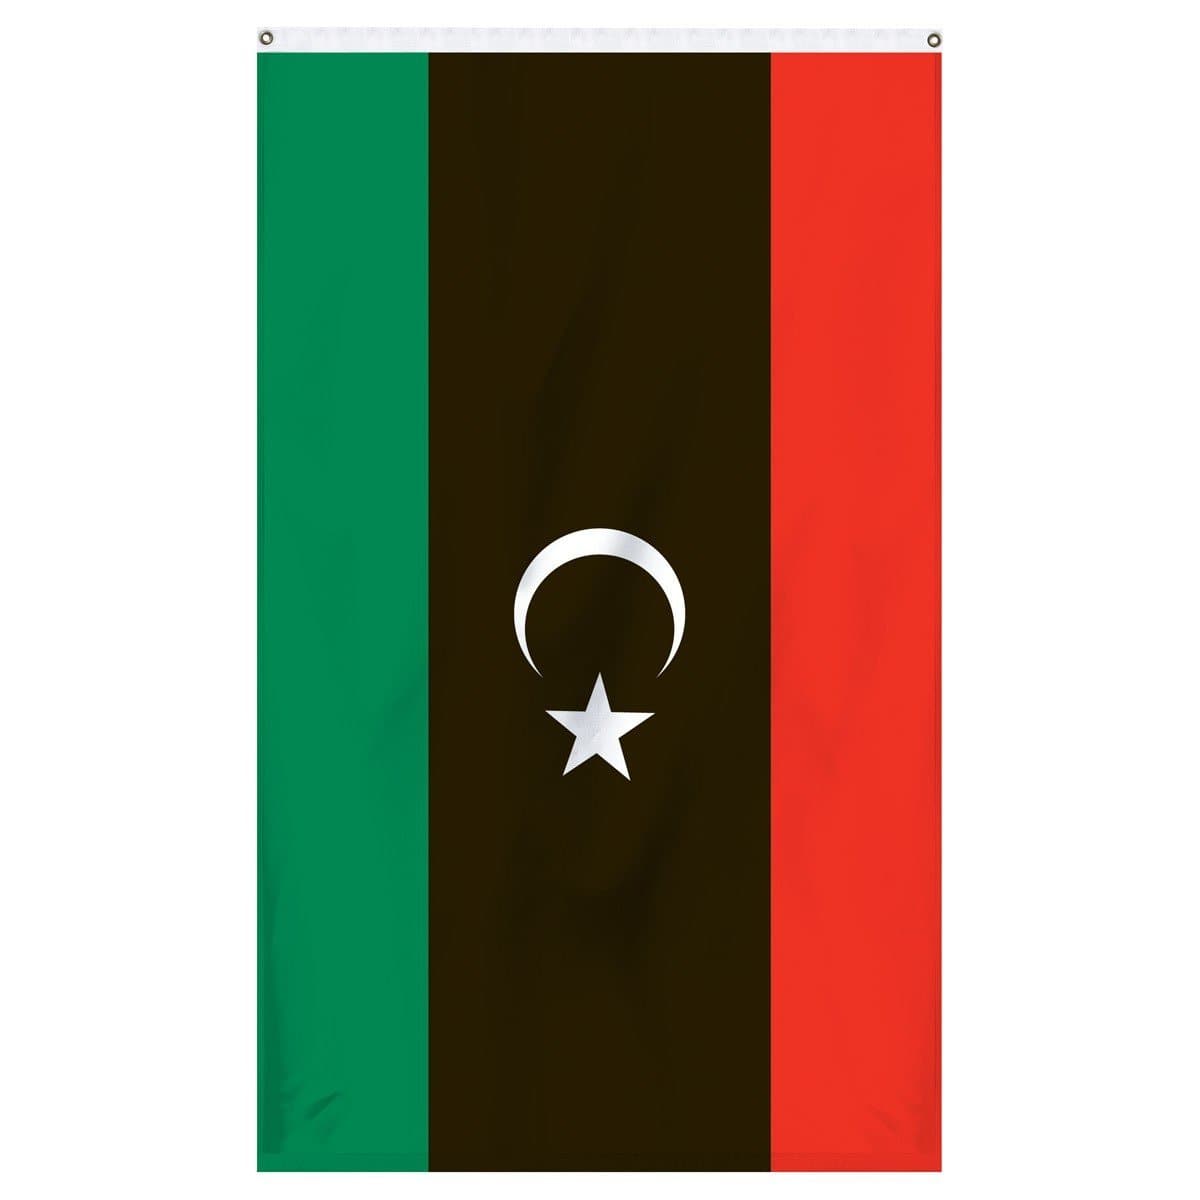 the kingdom of Libya national flag for sale to buy online now for flagpoles and parades